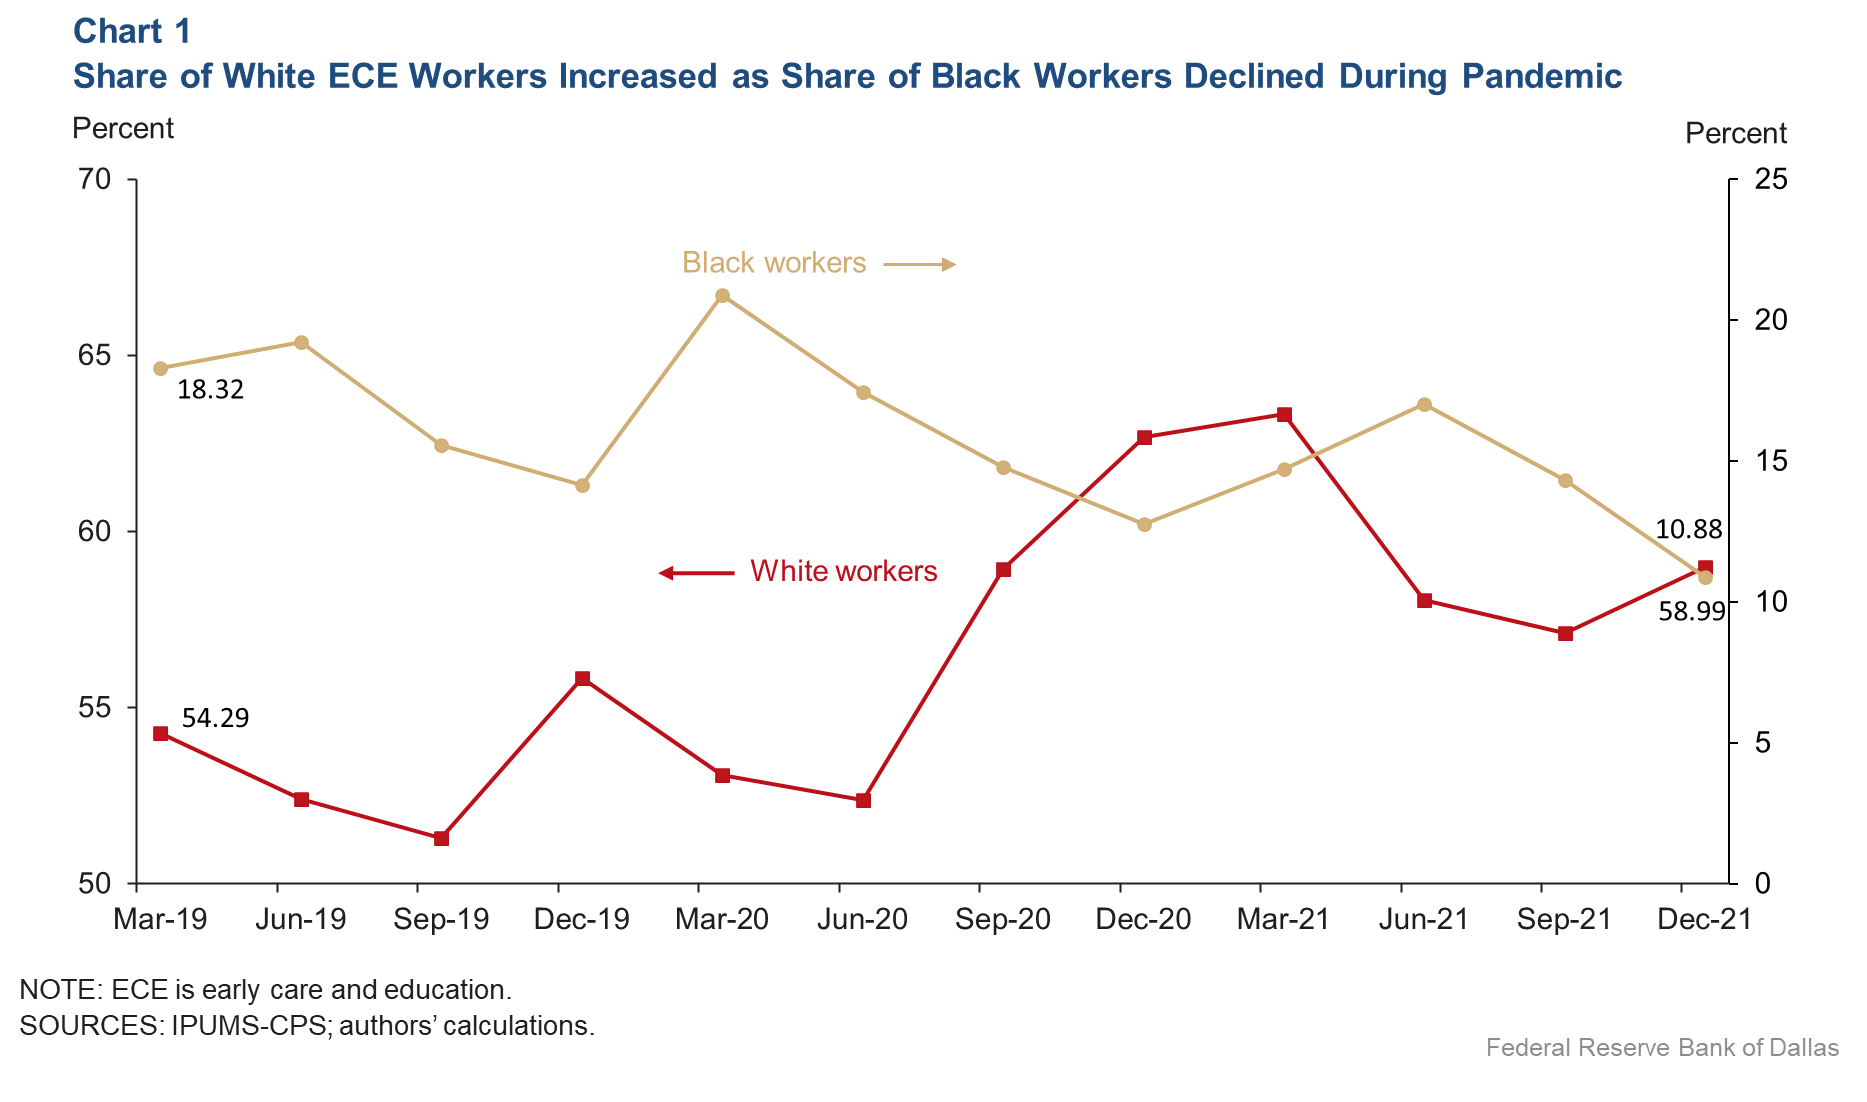 Chart 1: Share of White ECE Workers Increased as Share of Black Workers Declined During Pandemic